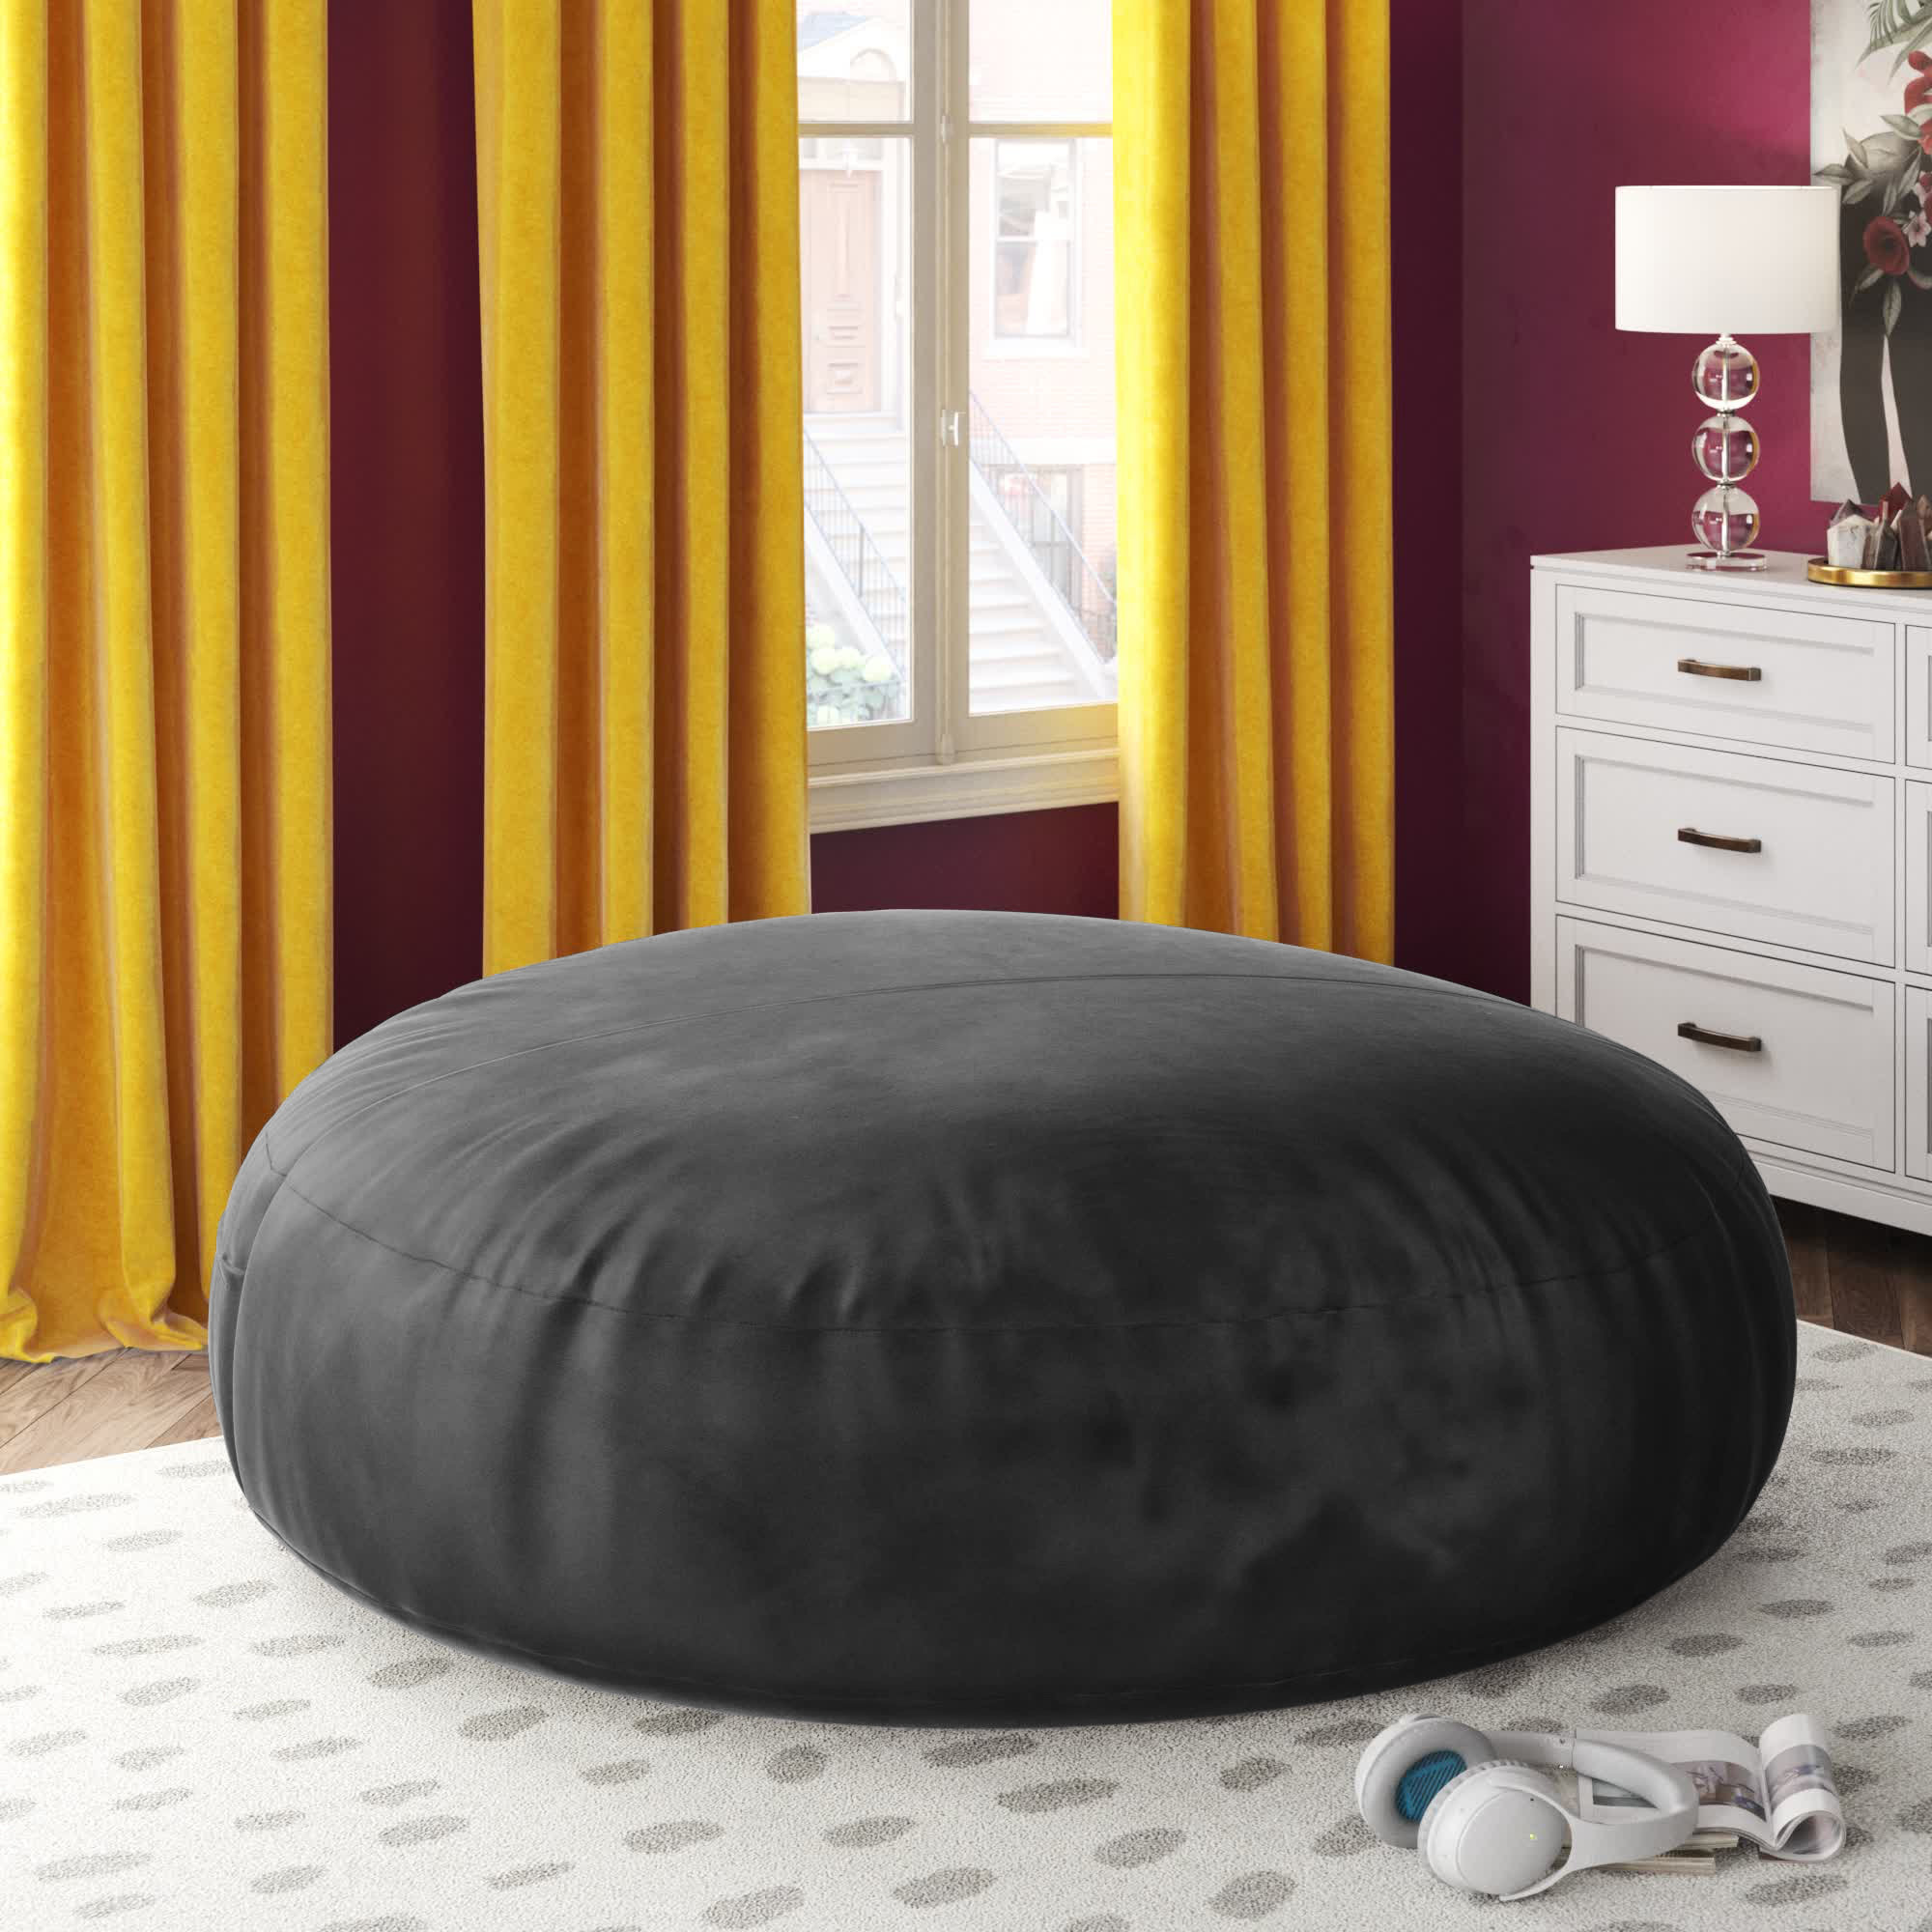 Ultimate Sack (6 ft.) Bean Bag Chair in multiple colors: Giant Foam-Filled  Furniture. - On Sale - Bed Bath & Beyond - 34824358